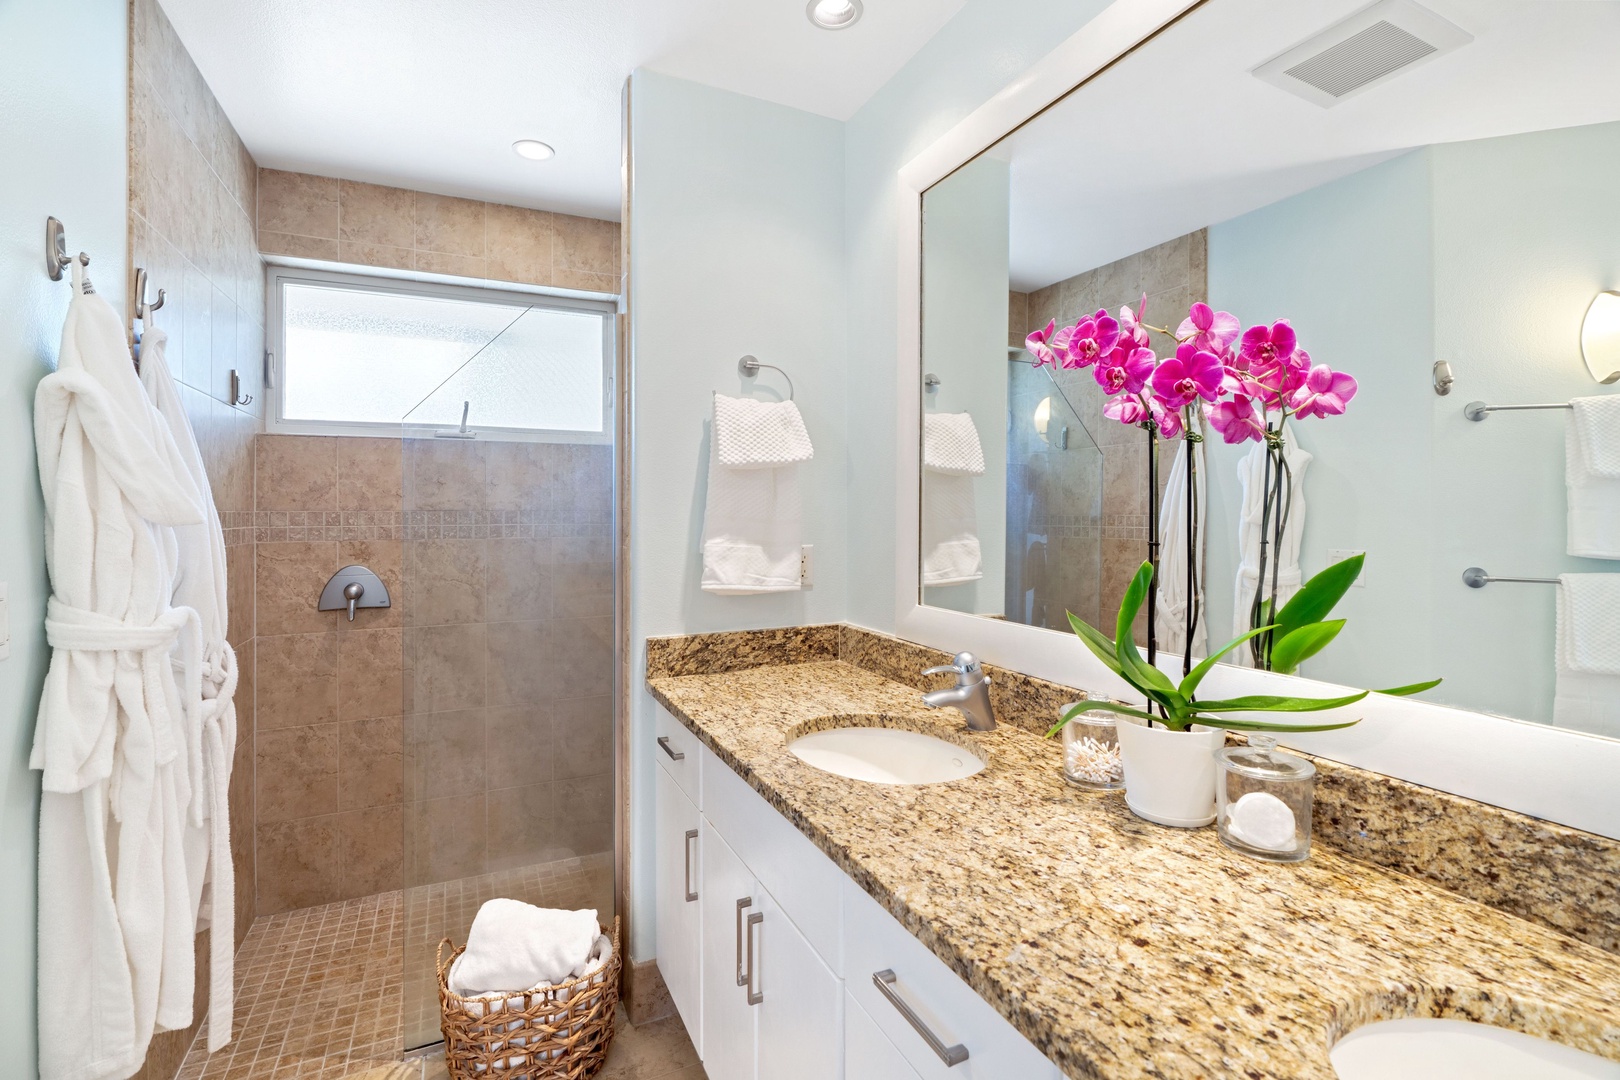 Princeville Vacation Rentals, Tropical Elegance - Guest ensuite with a walk-in shower in a glass enclosure.